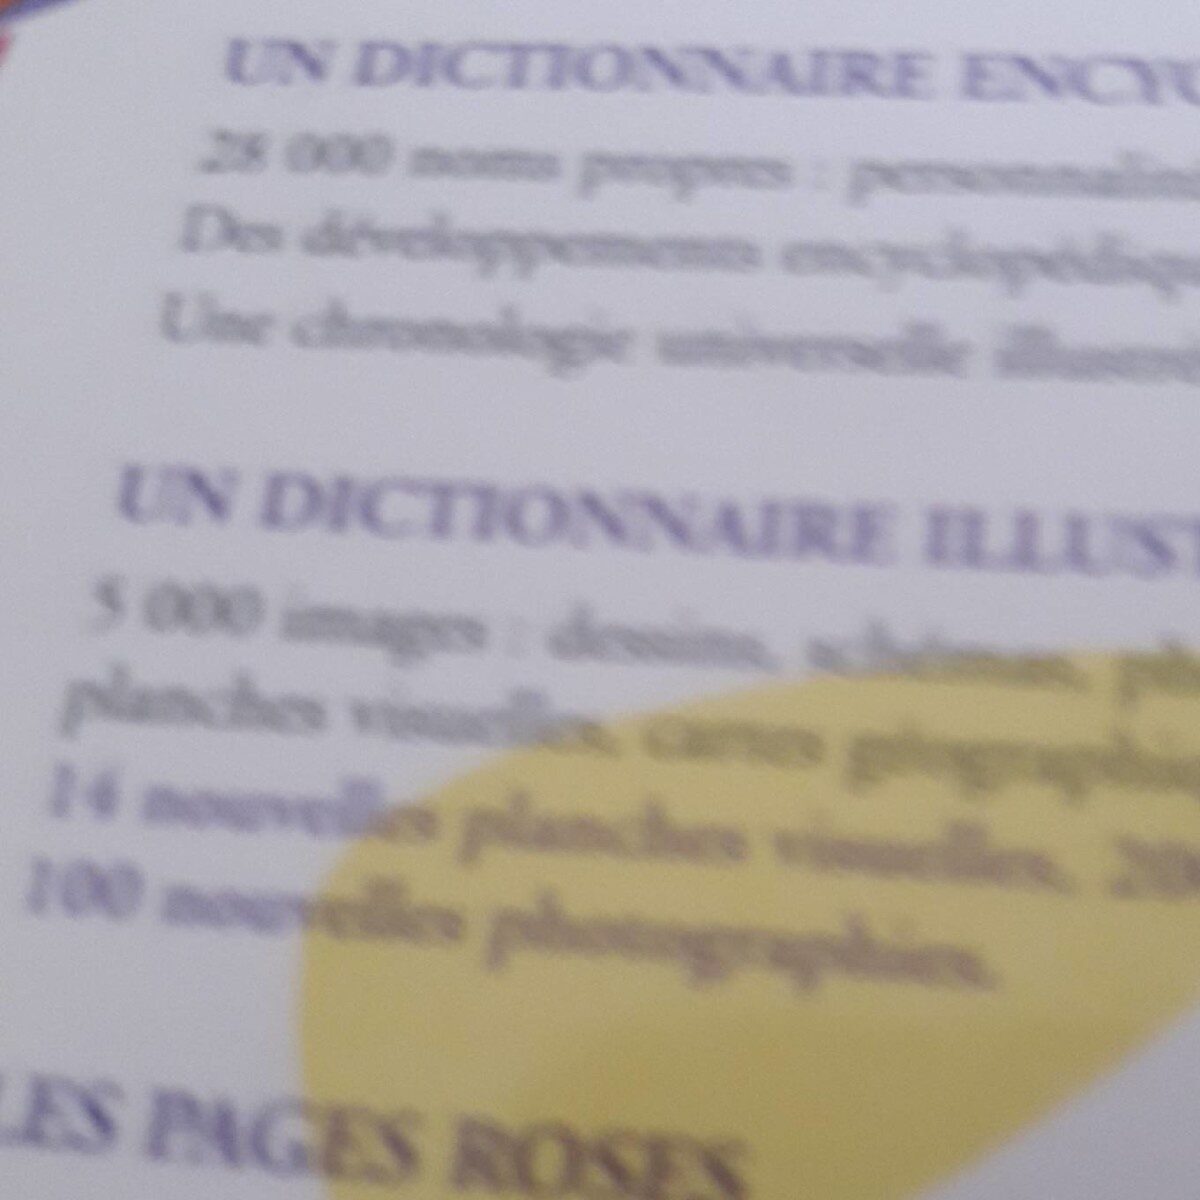 Dictionnaire - Ingredients - fr